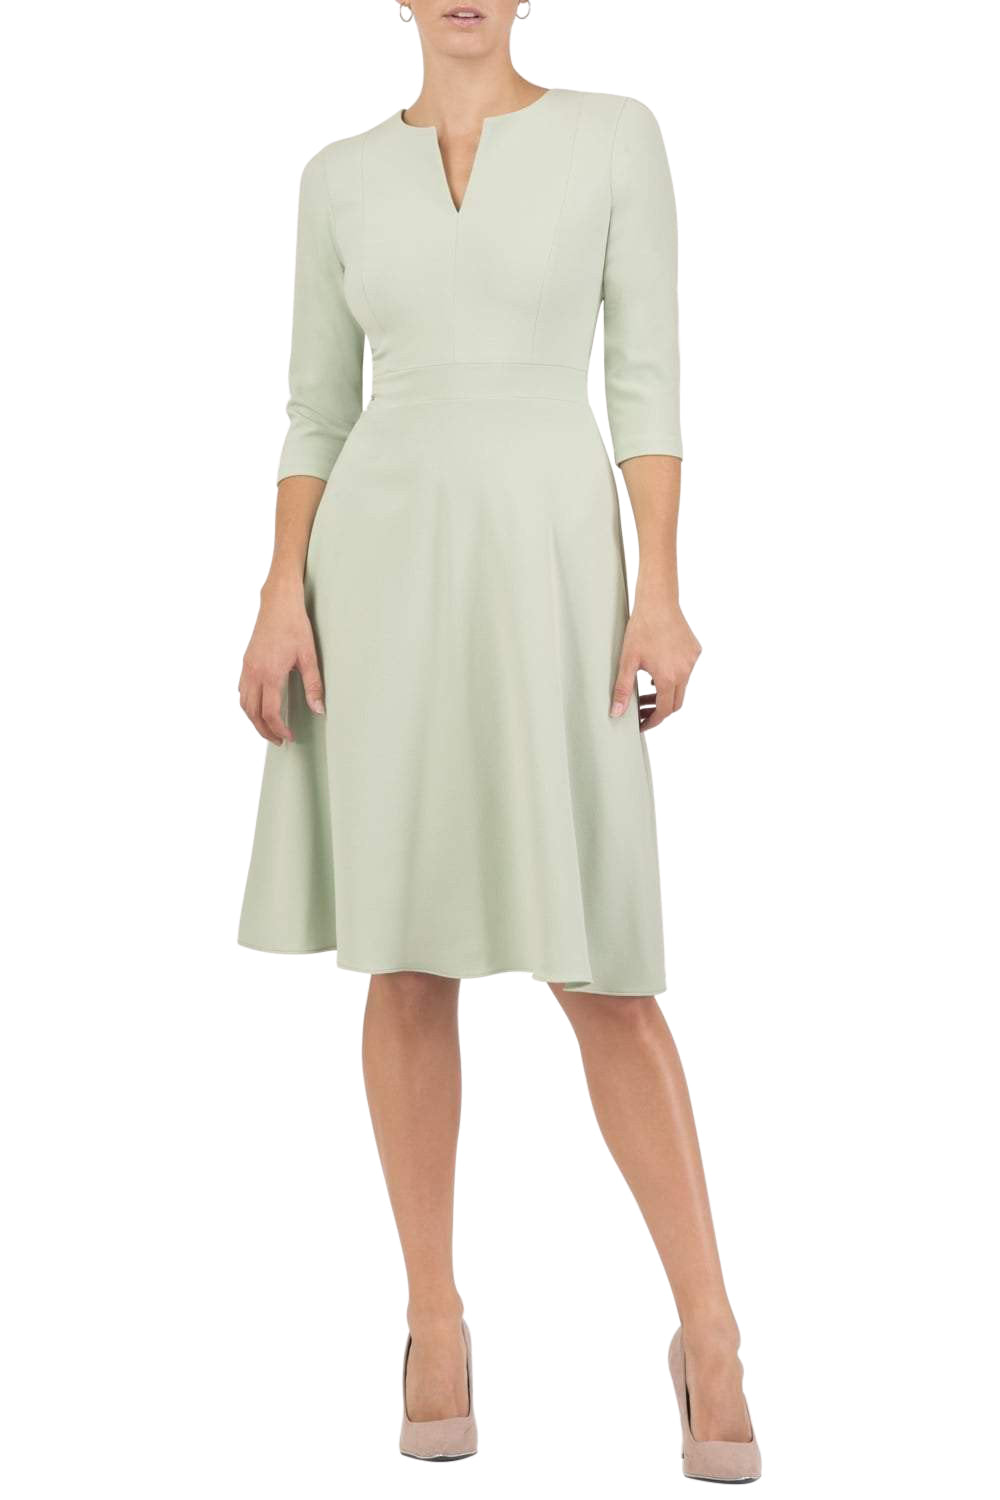 blonde model wearing diva catwalk romney three quarter sleeve swing dress with a band in deco green front